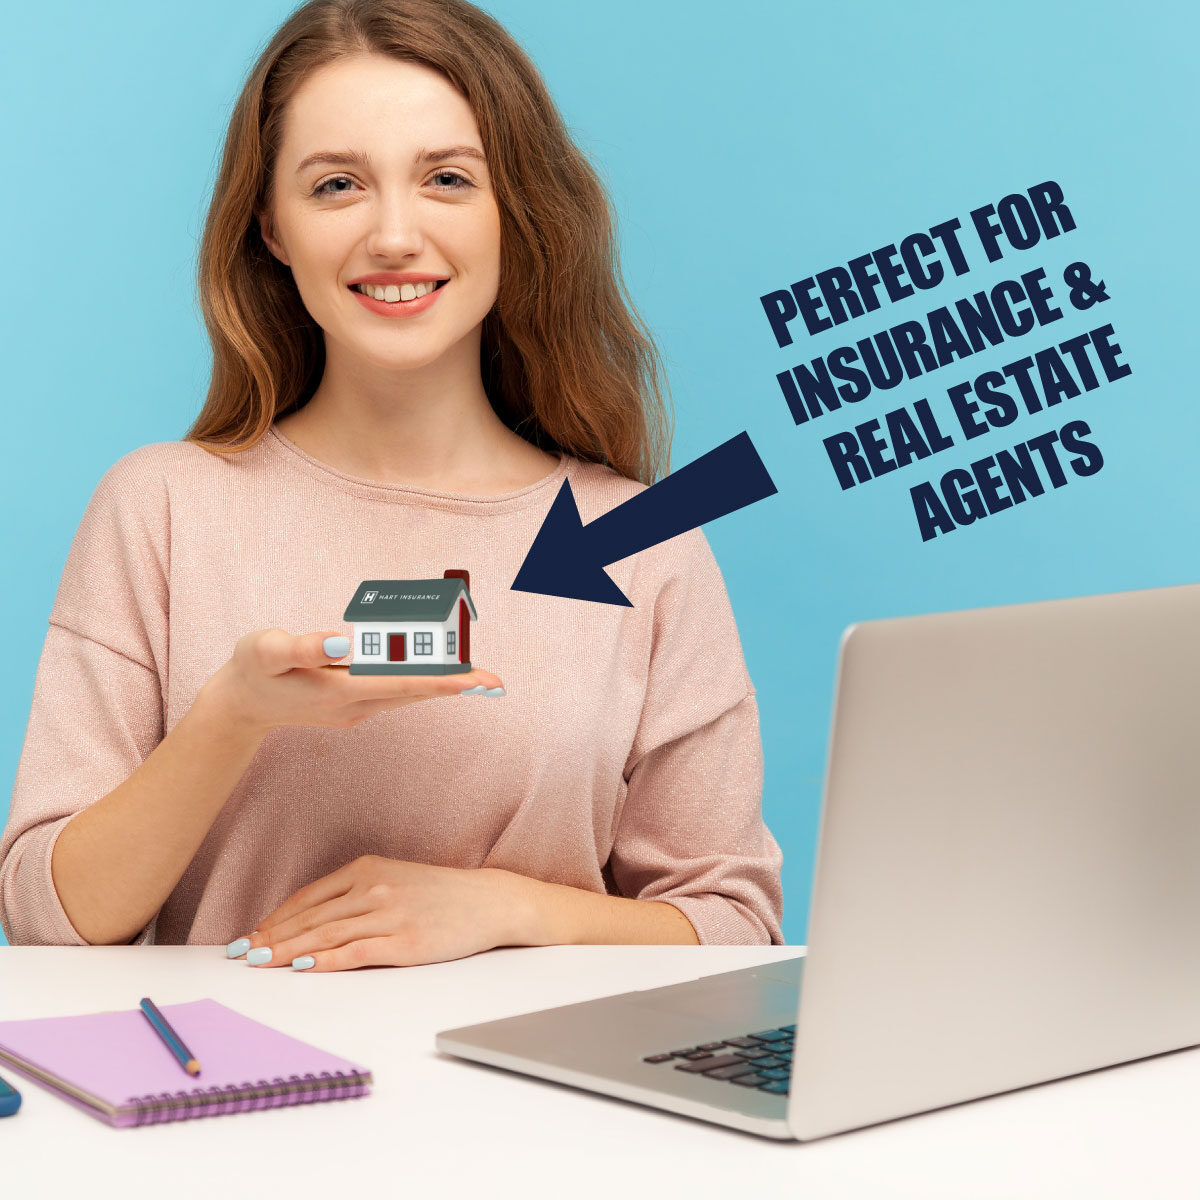 Smiling office worker at a desk holding a home-shaped stress ball with insurance company logo